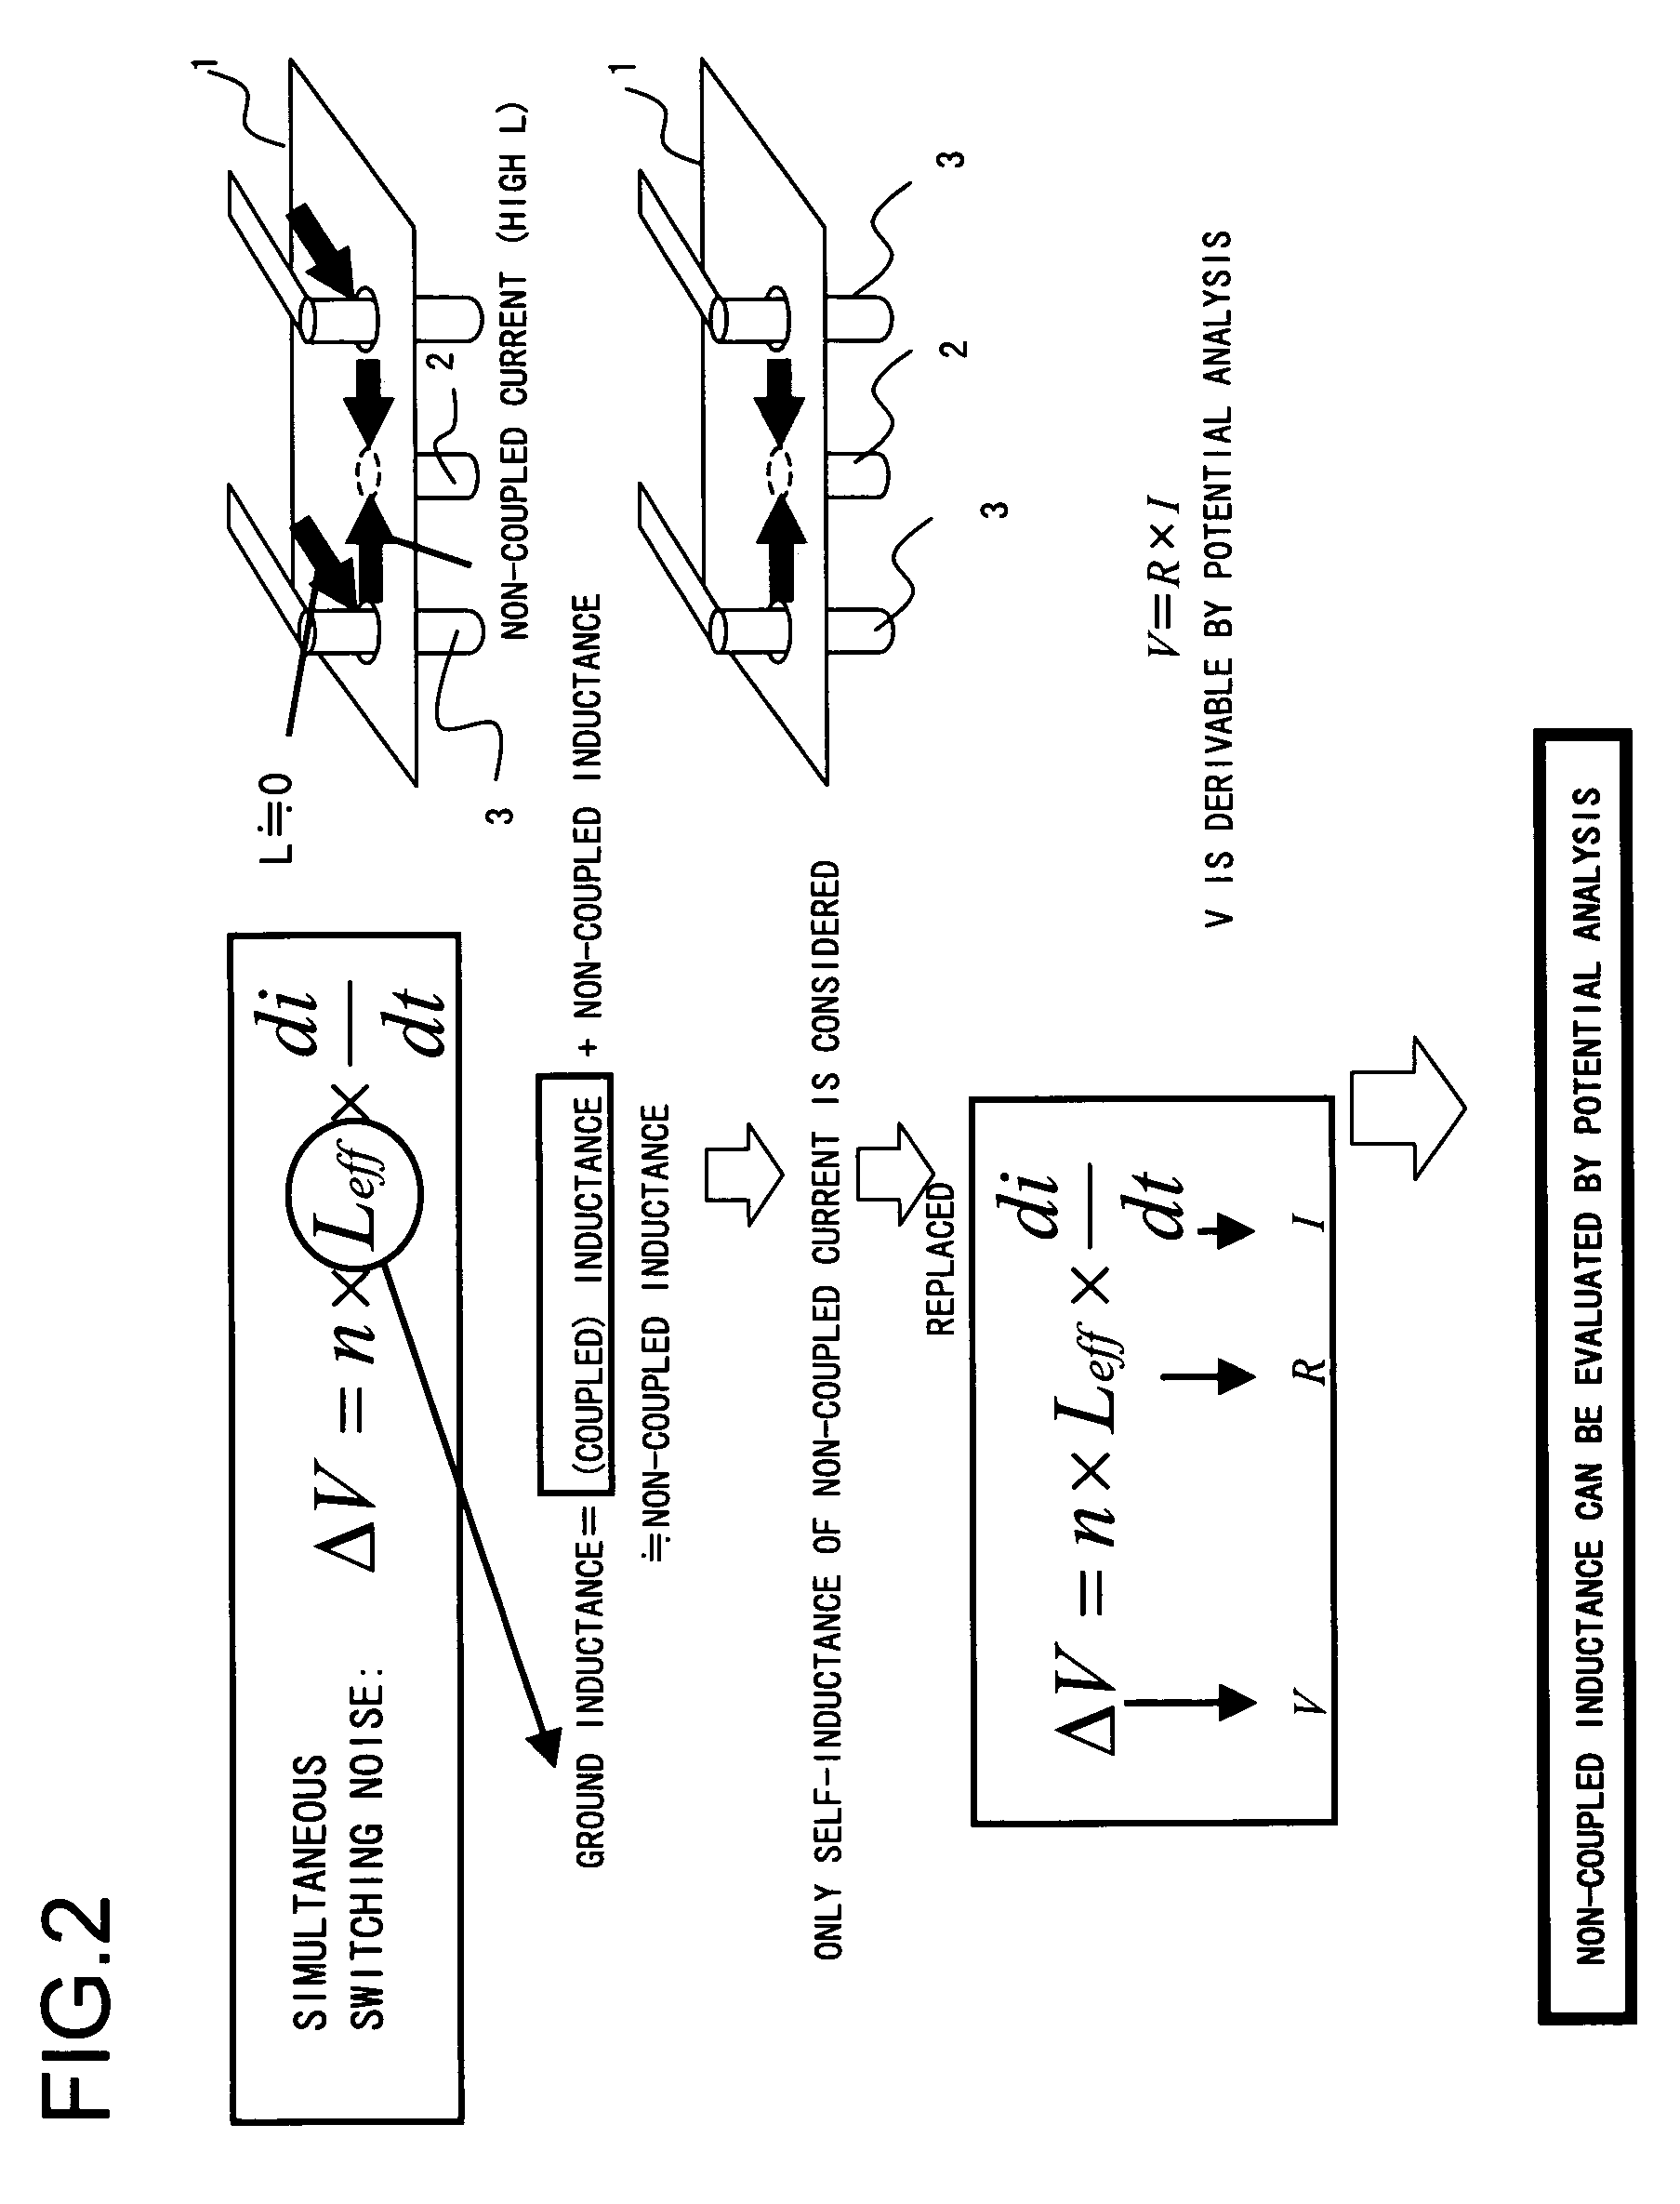 Inductance analysis system and method and program therefor